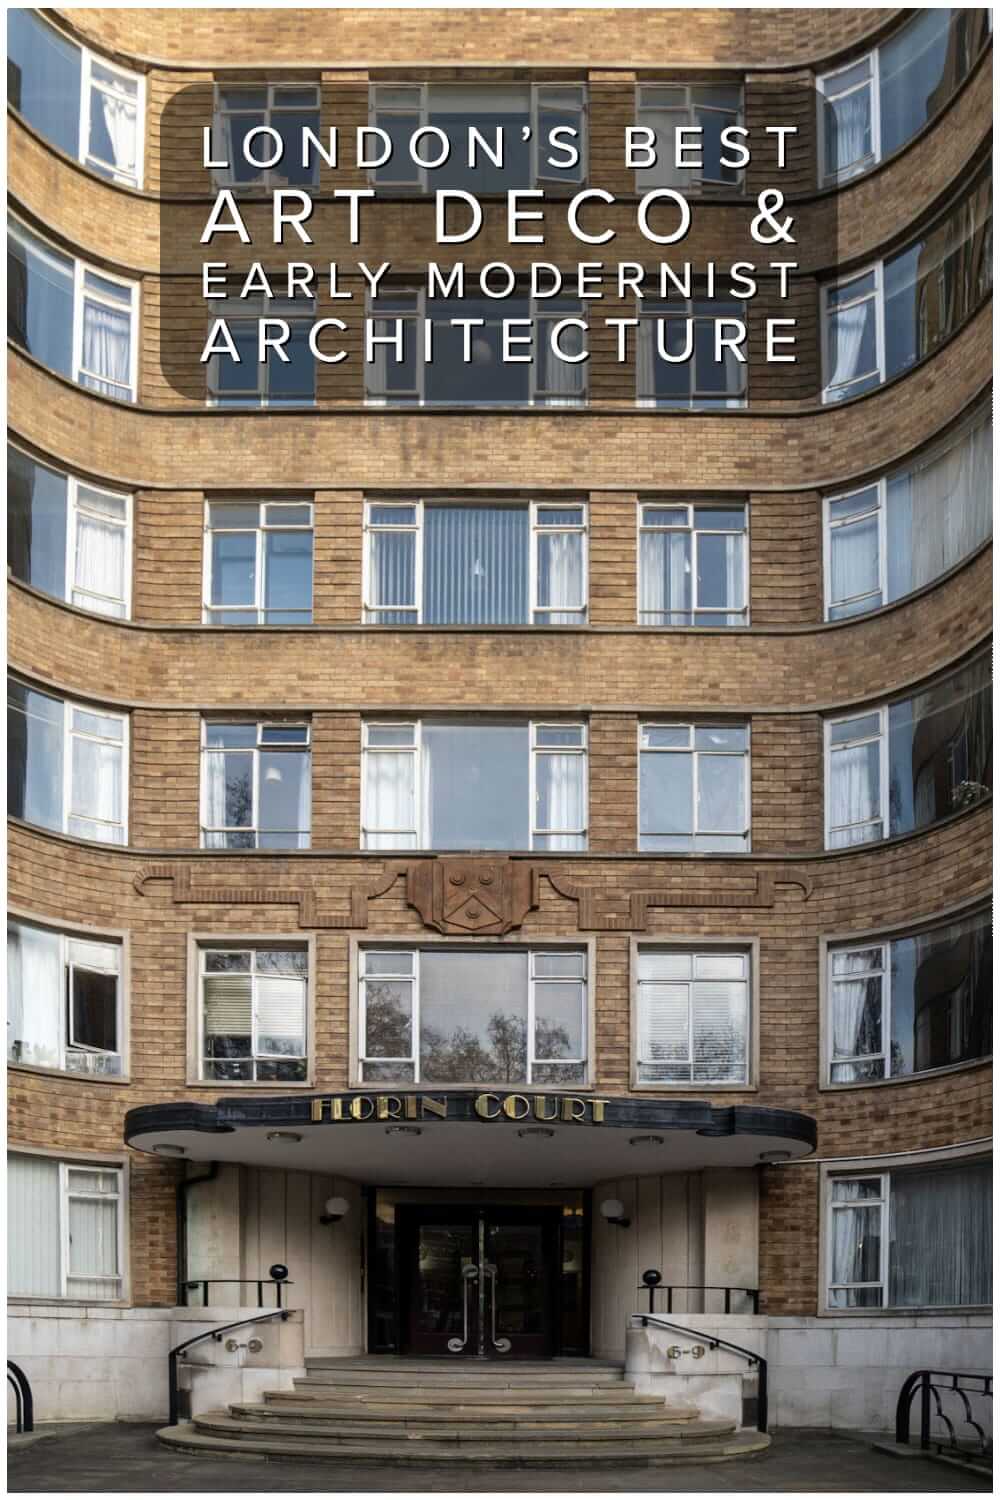 Photographs of London’s best Art Deco and early modernist architecture, a distinctive style that took off in Britain in the 1920s and 1930s #England #UK #FlorinCourt #ArtDeco